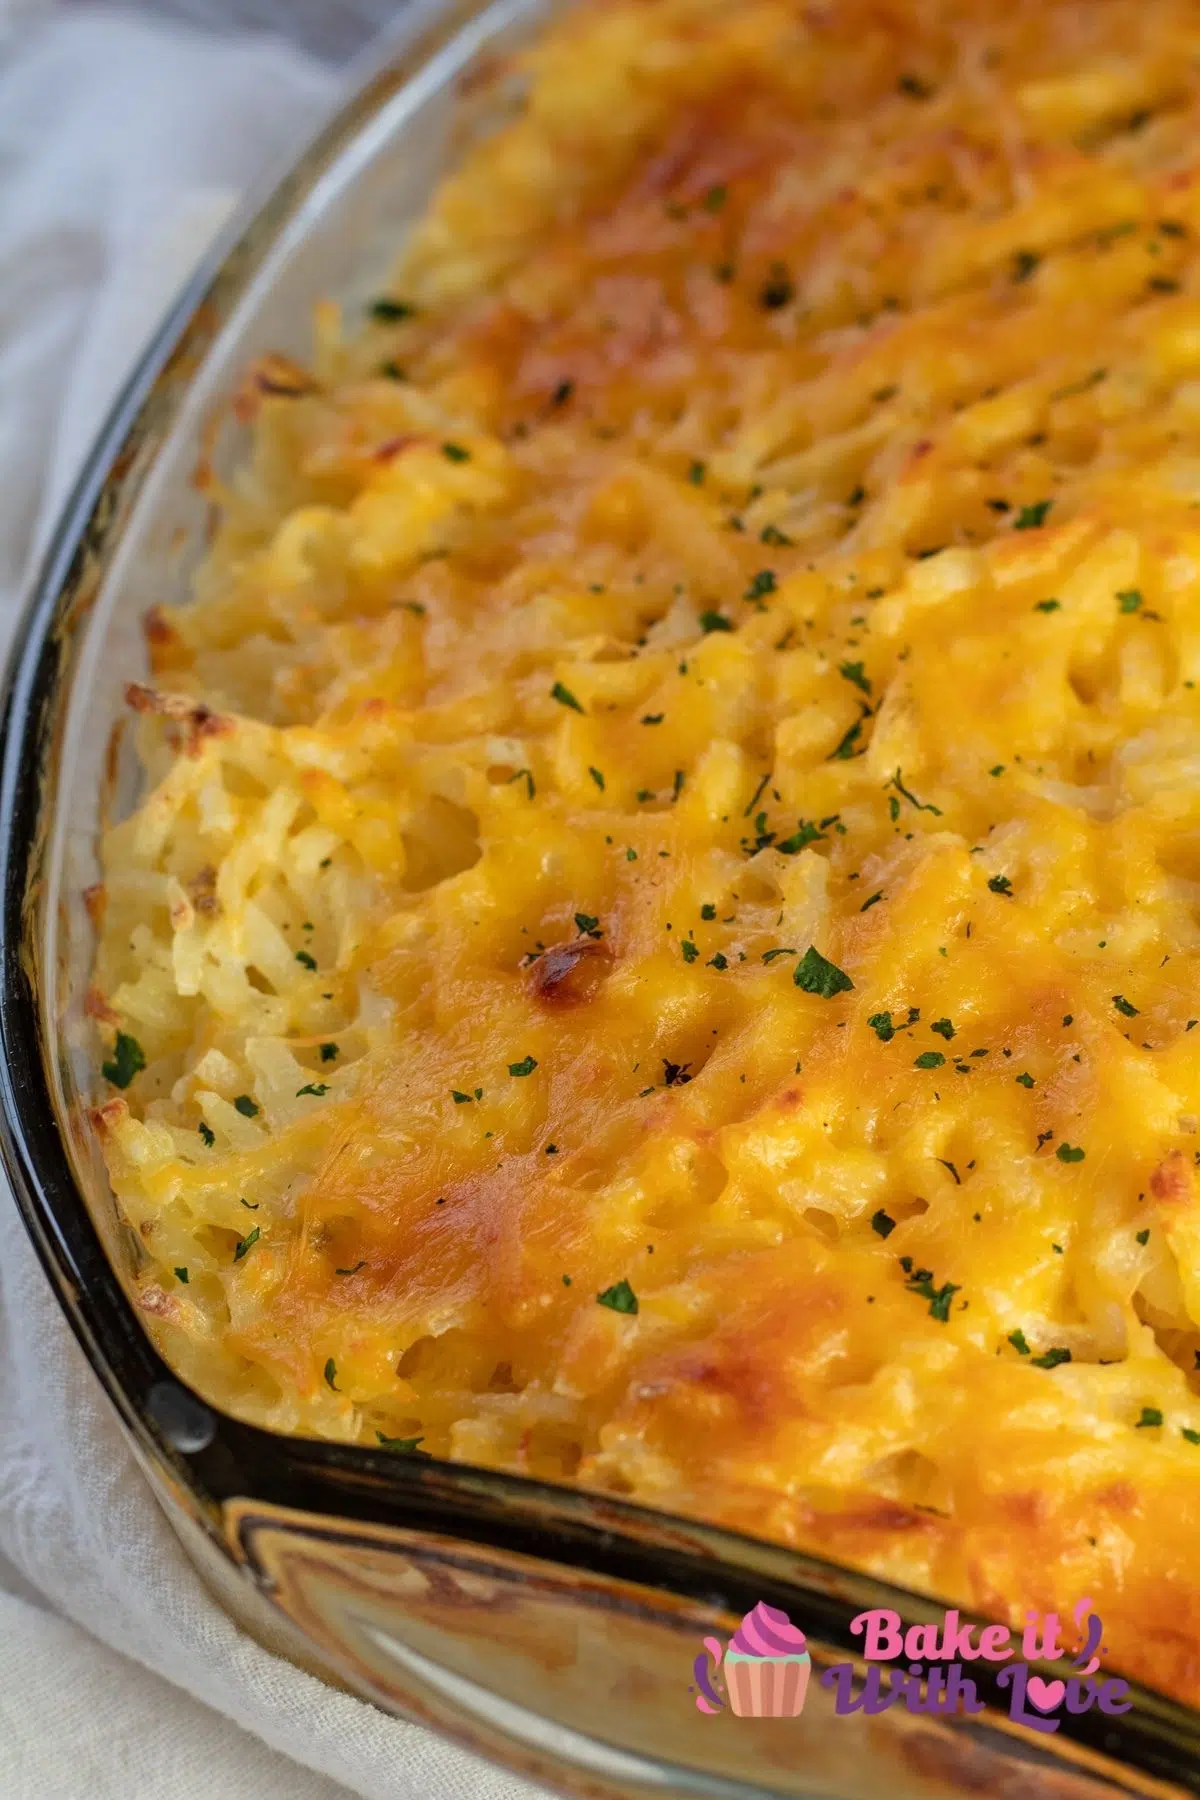 Tall image of Cracker Barrel Hashbrown casserole copycate in a glass baking dish.